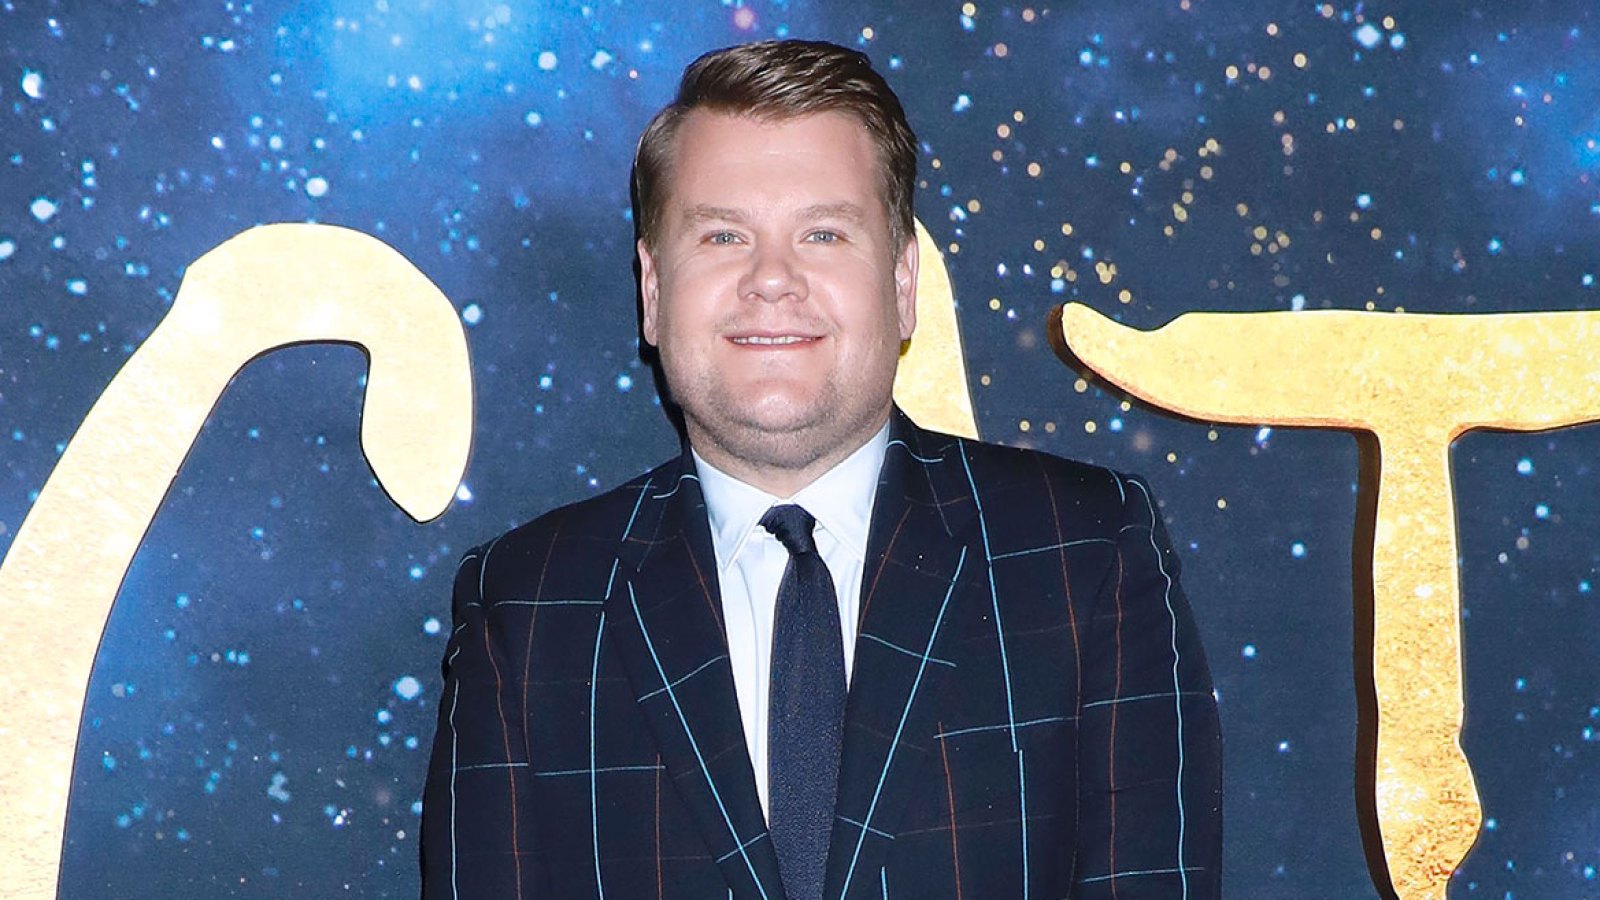 James Corden Reveals He Only Washes His Hair Every 2 Months